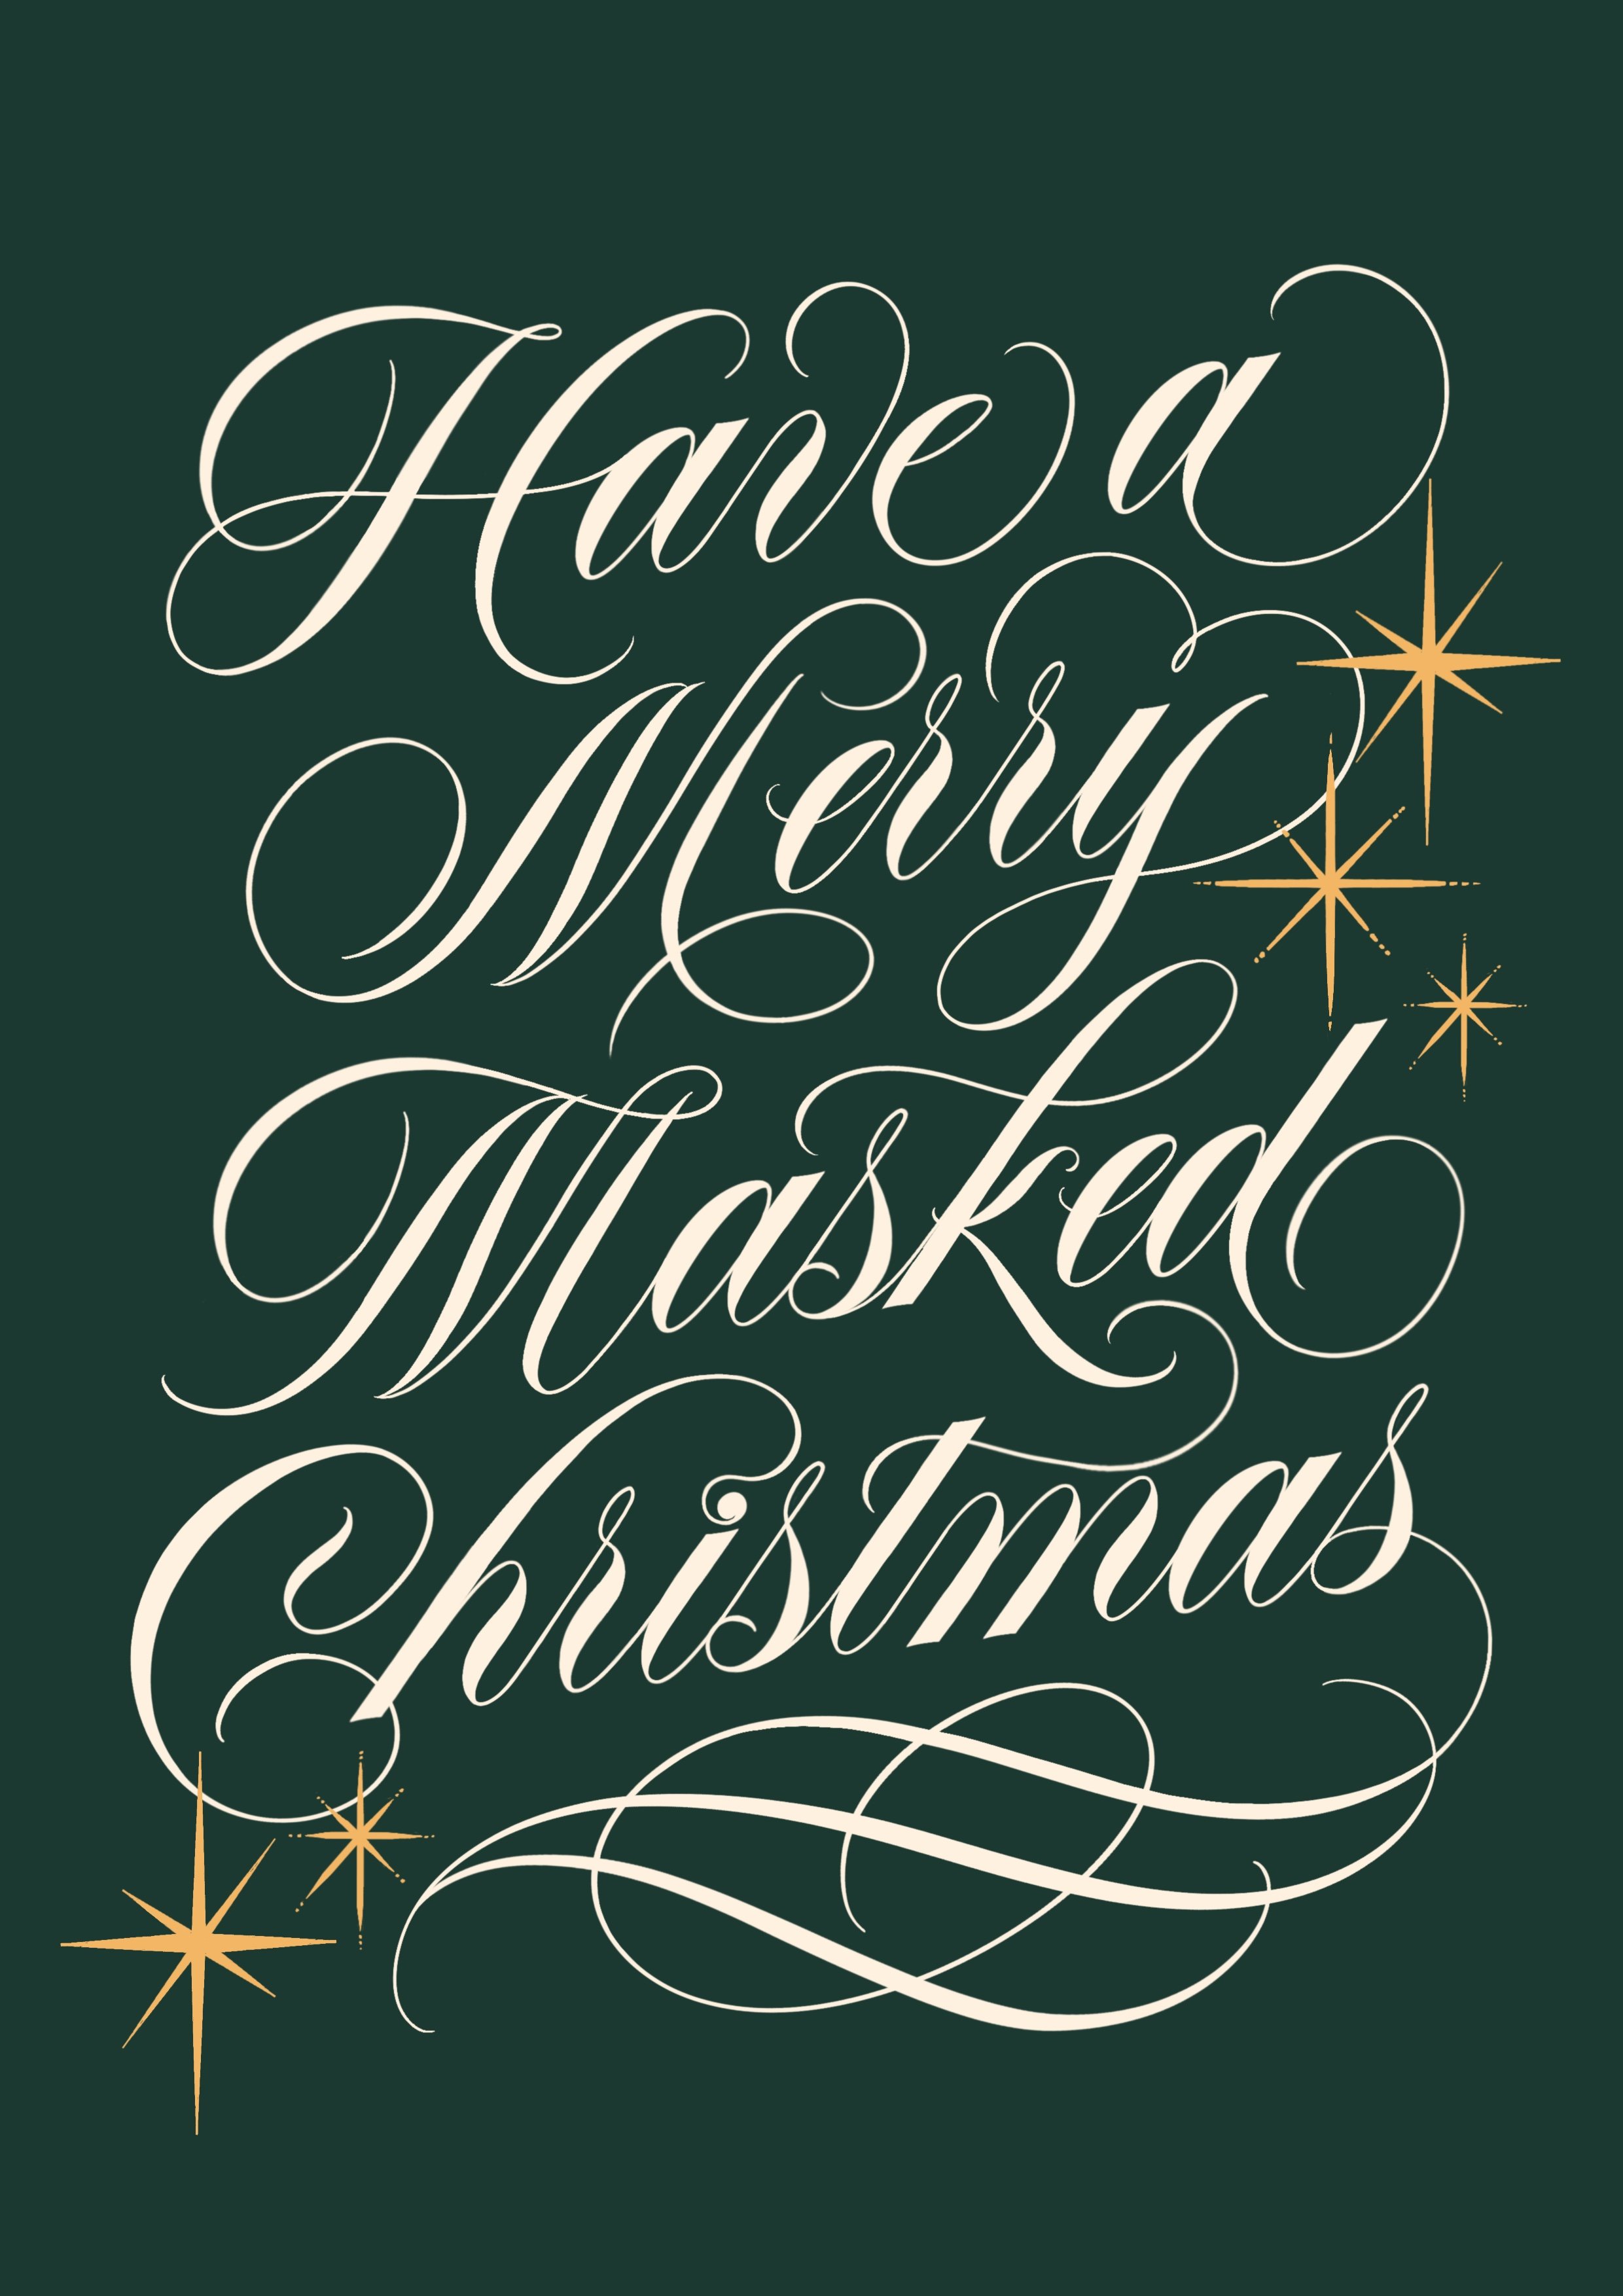 Have A Merry Masked Christmas - Spencerian Lettering.jpg